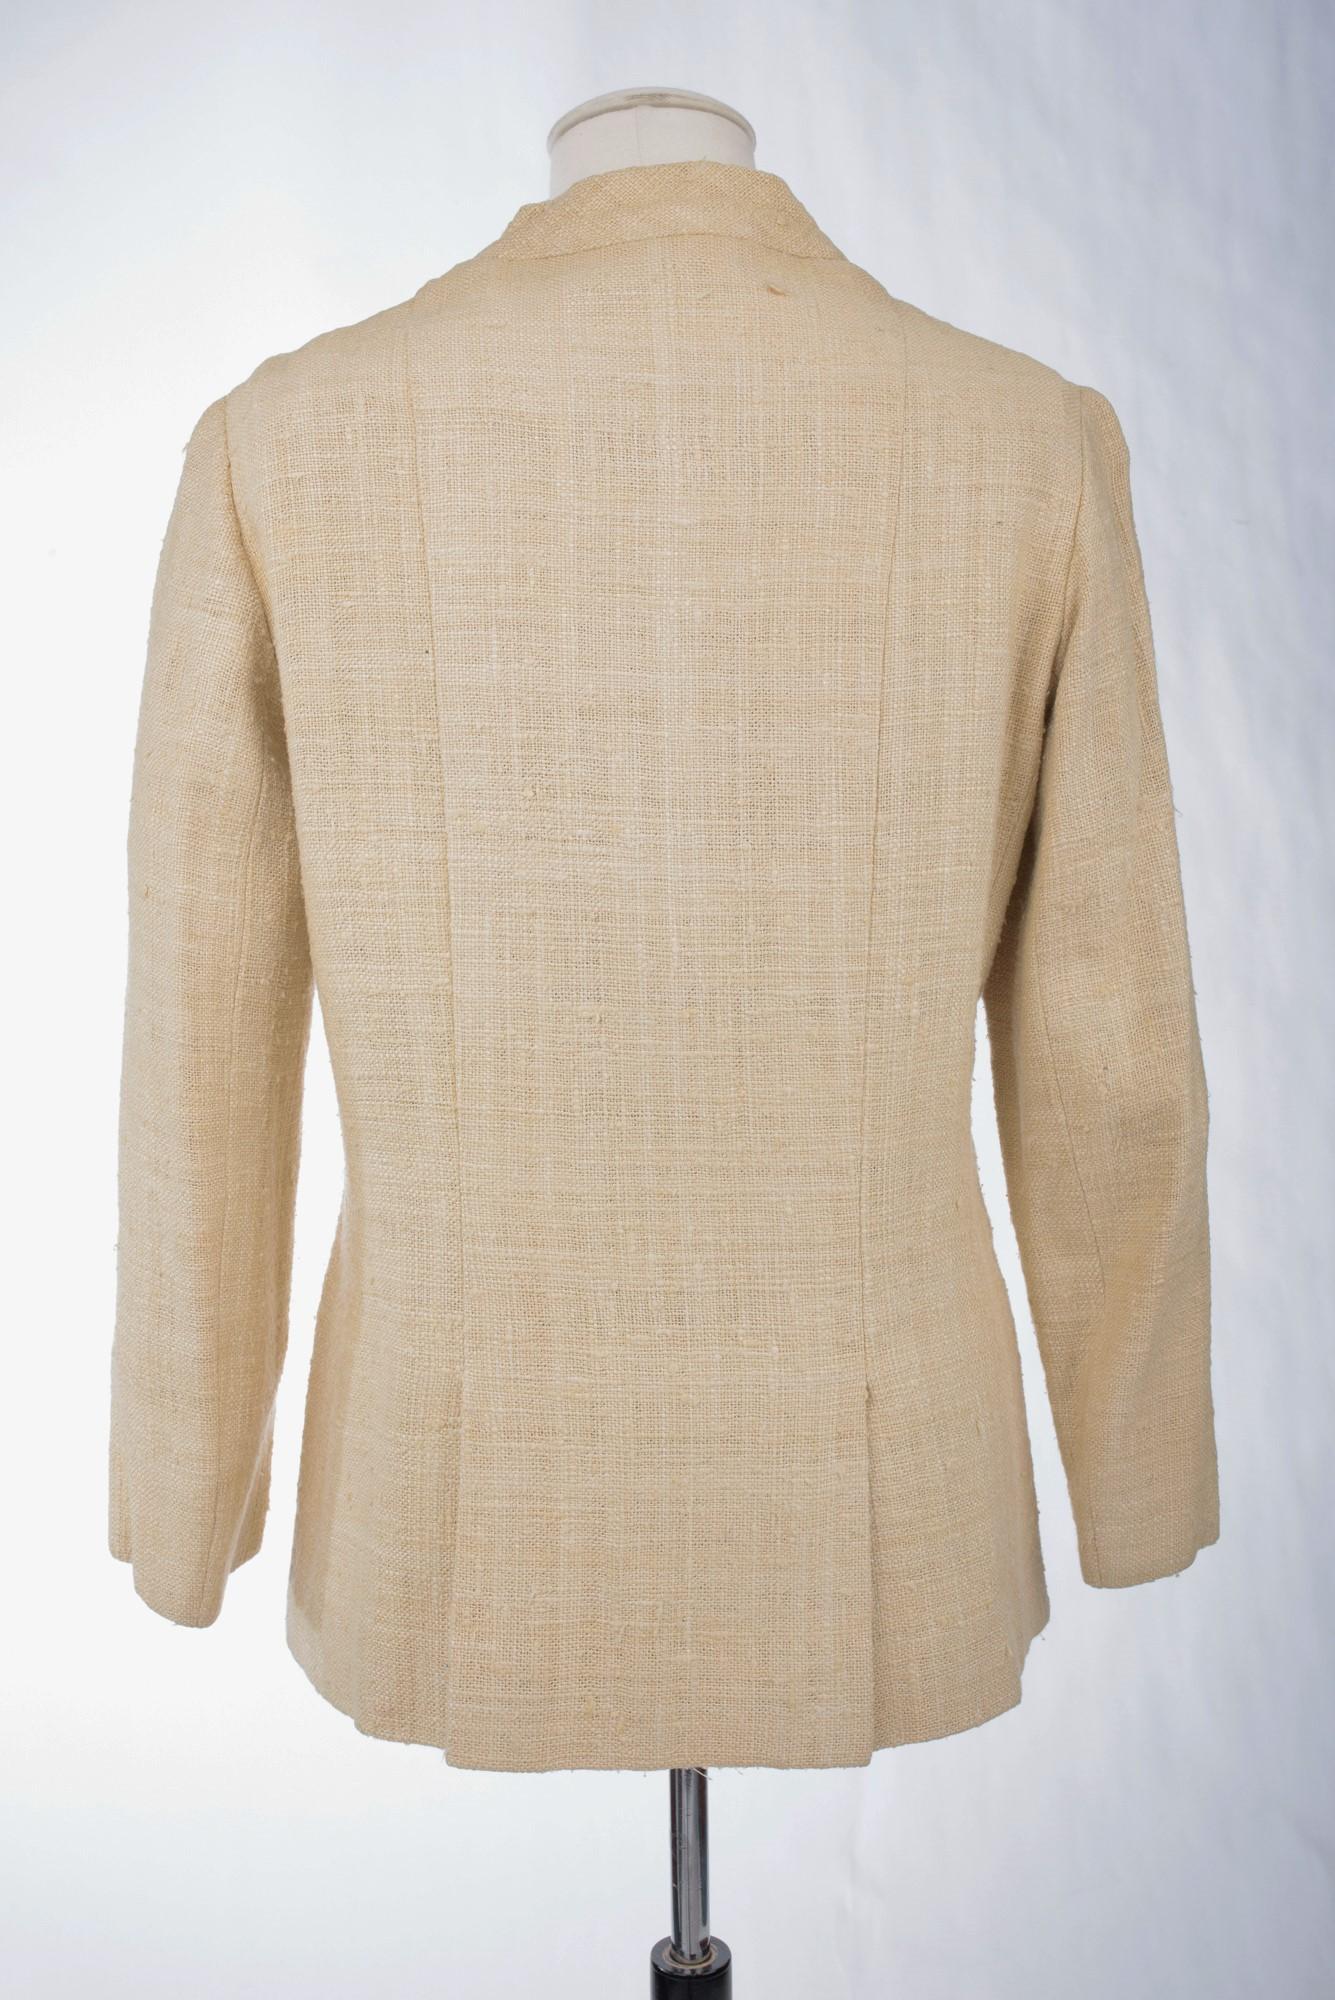  A French Safari Jacket In Beige Linen And Silk Toile Circa 1968-1972 For Sale 5